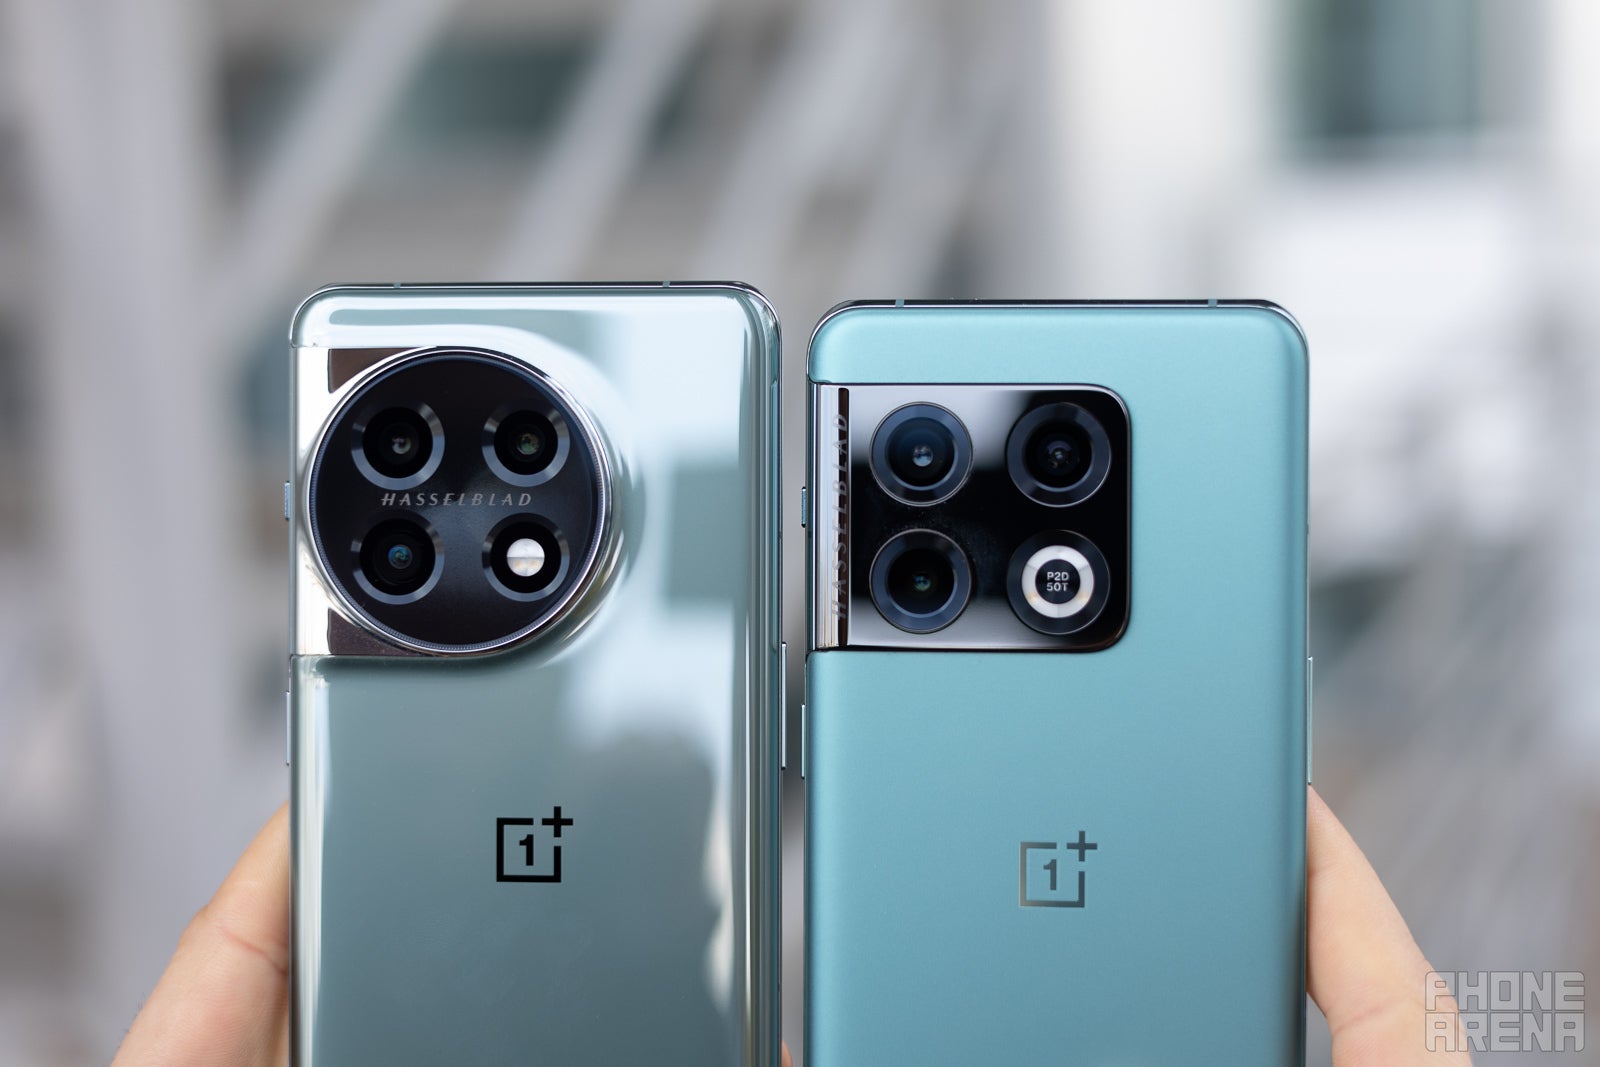 (Image credit - PhoneArena) OnePlus 11 (left) and OnePlus 10 Pro (right) - OnePlus 11 vs OnePlus 10 Pro: what are the main differences?